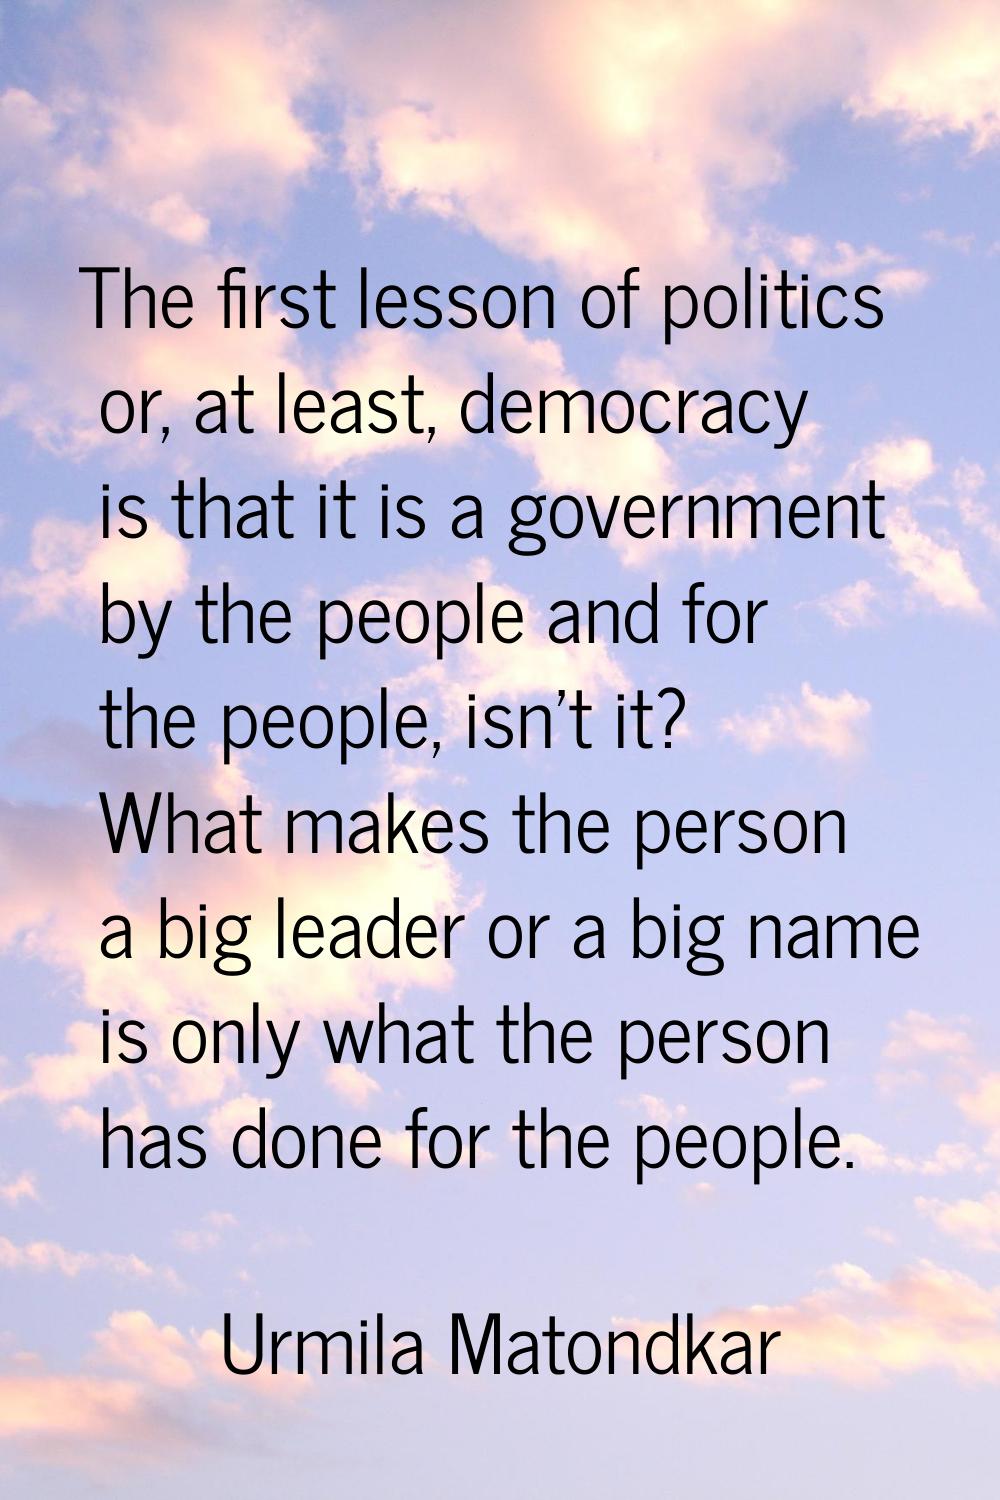 The first lesson of politics or, at least, democracy is that it is a government by the people and f